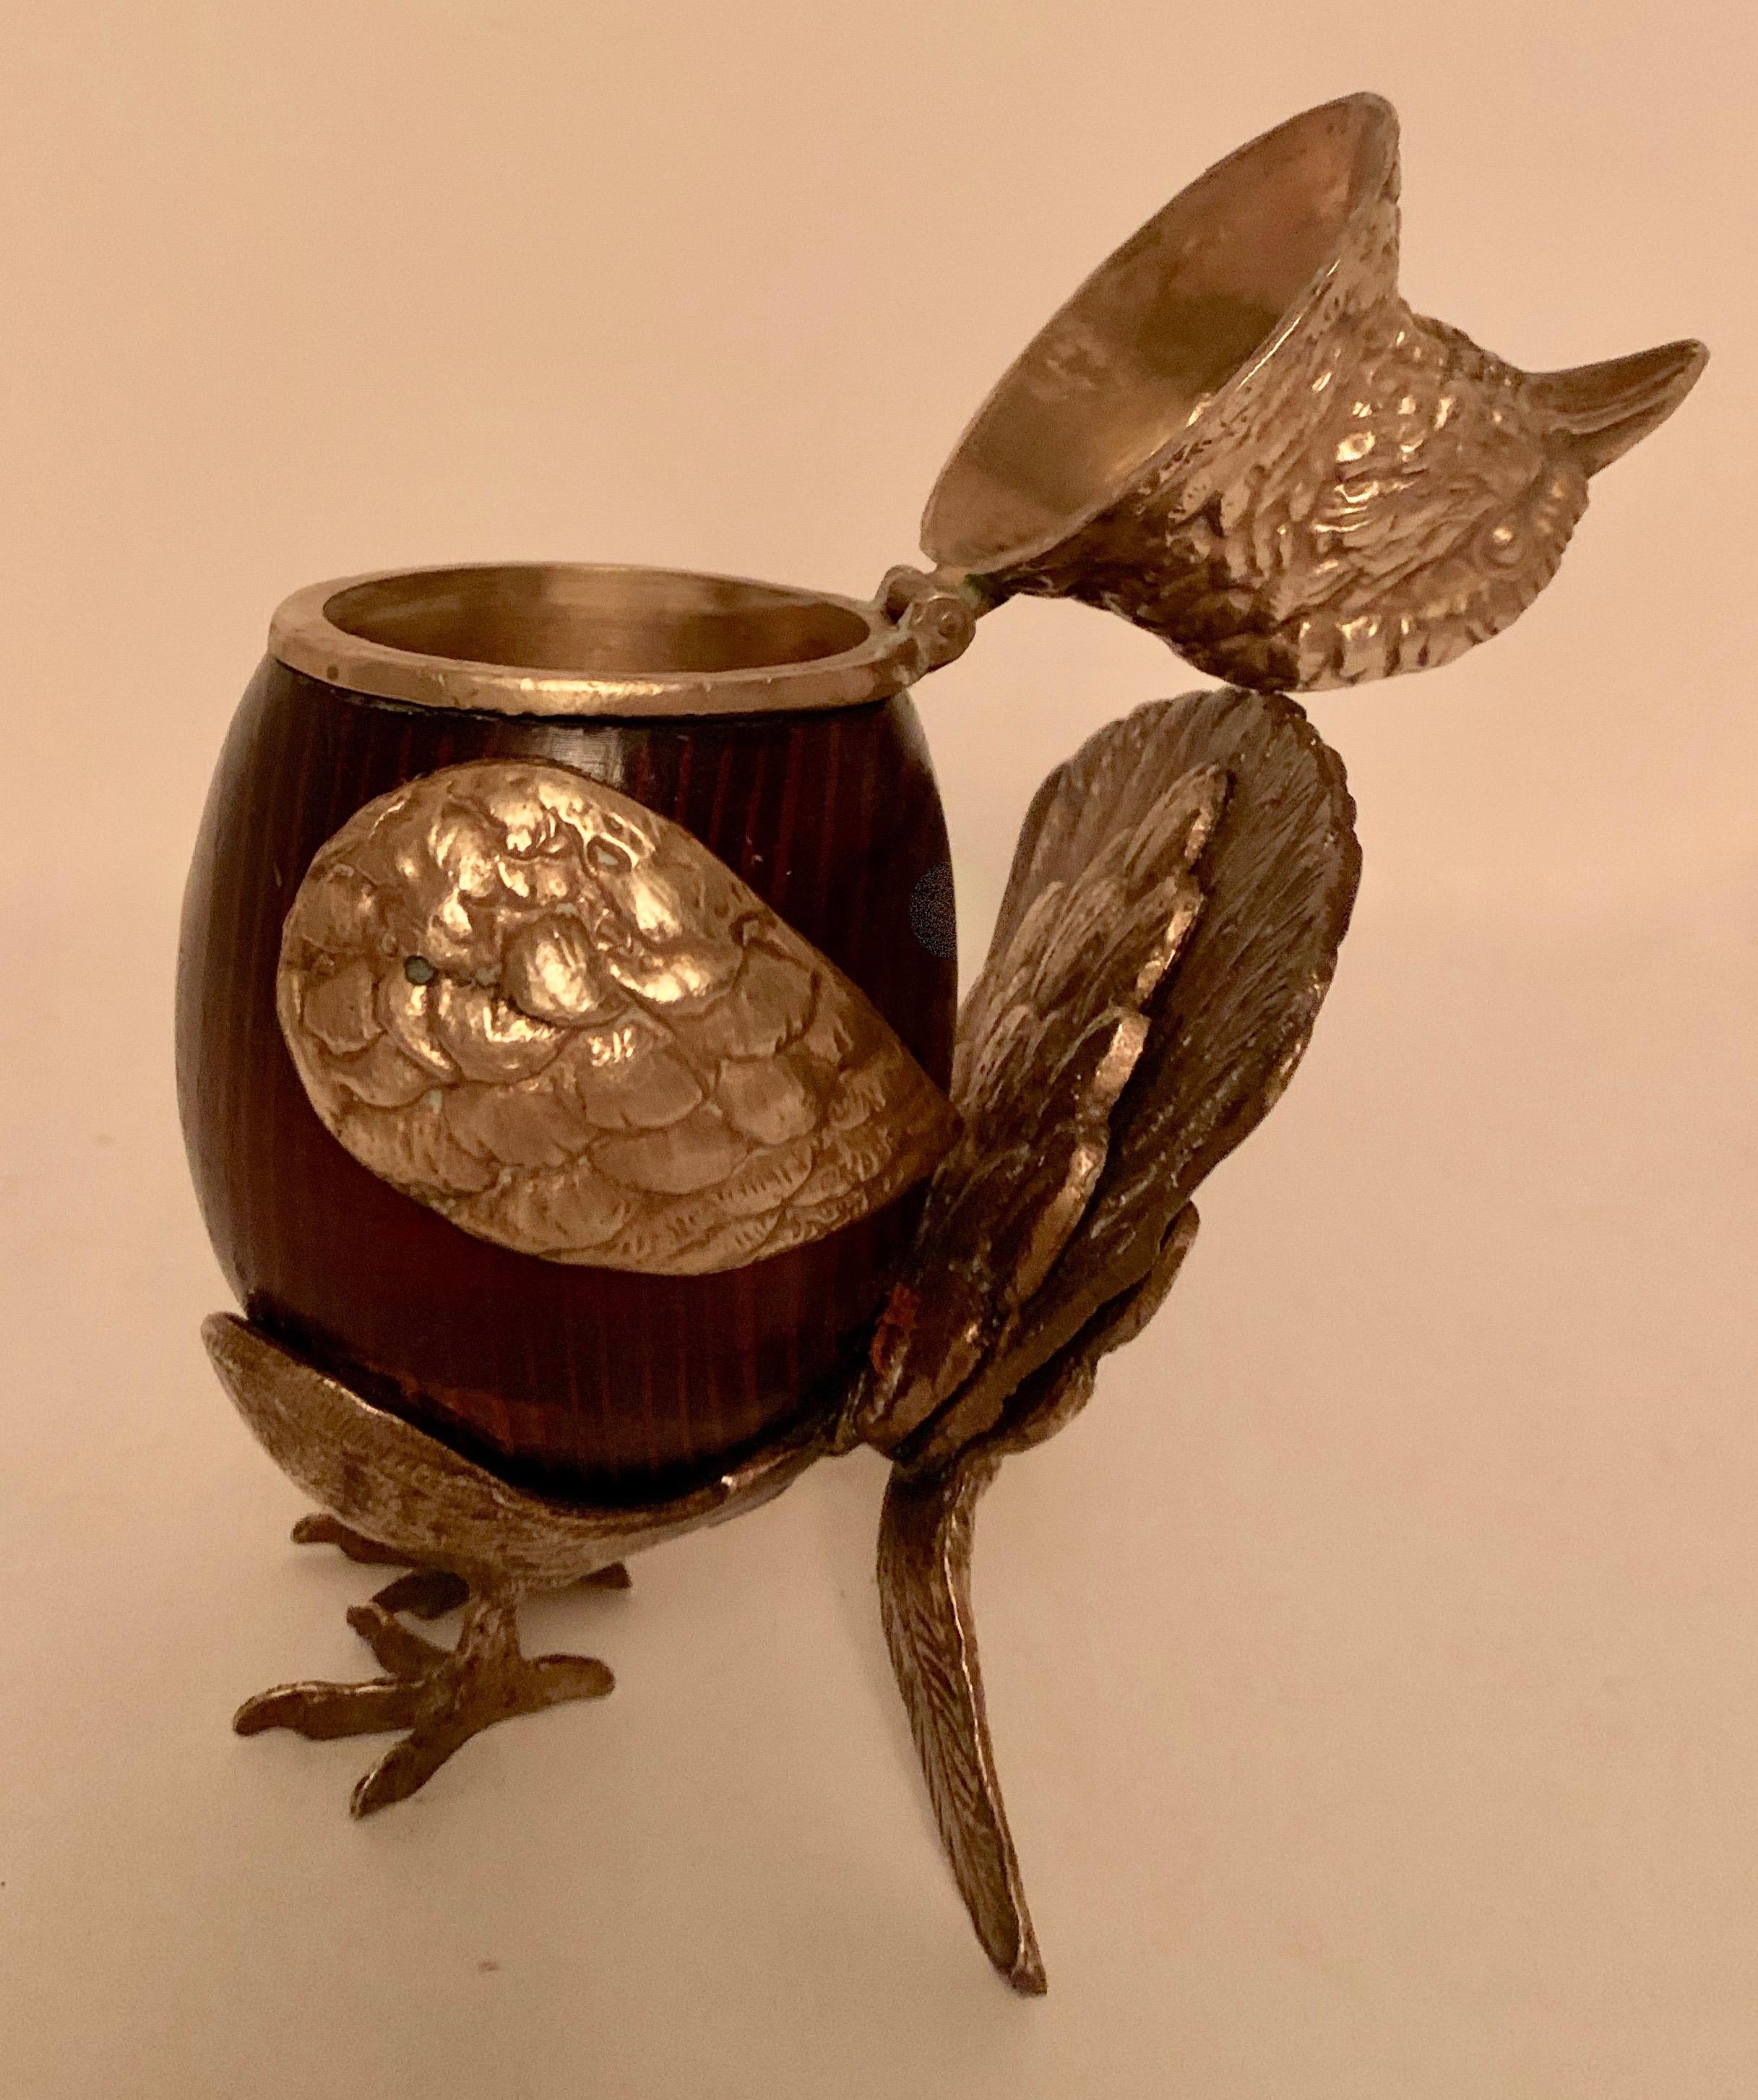 Arthur Court brass and wood bird stash box - the head tilts back to reveal a box to store private items and/or 420. A lovely box and great addition to any table or shelf, or use as a nice desk accessory.

A wonderful gift for the ornithologist in